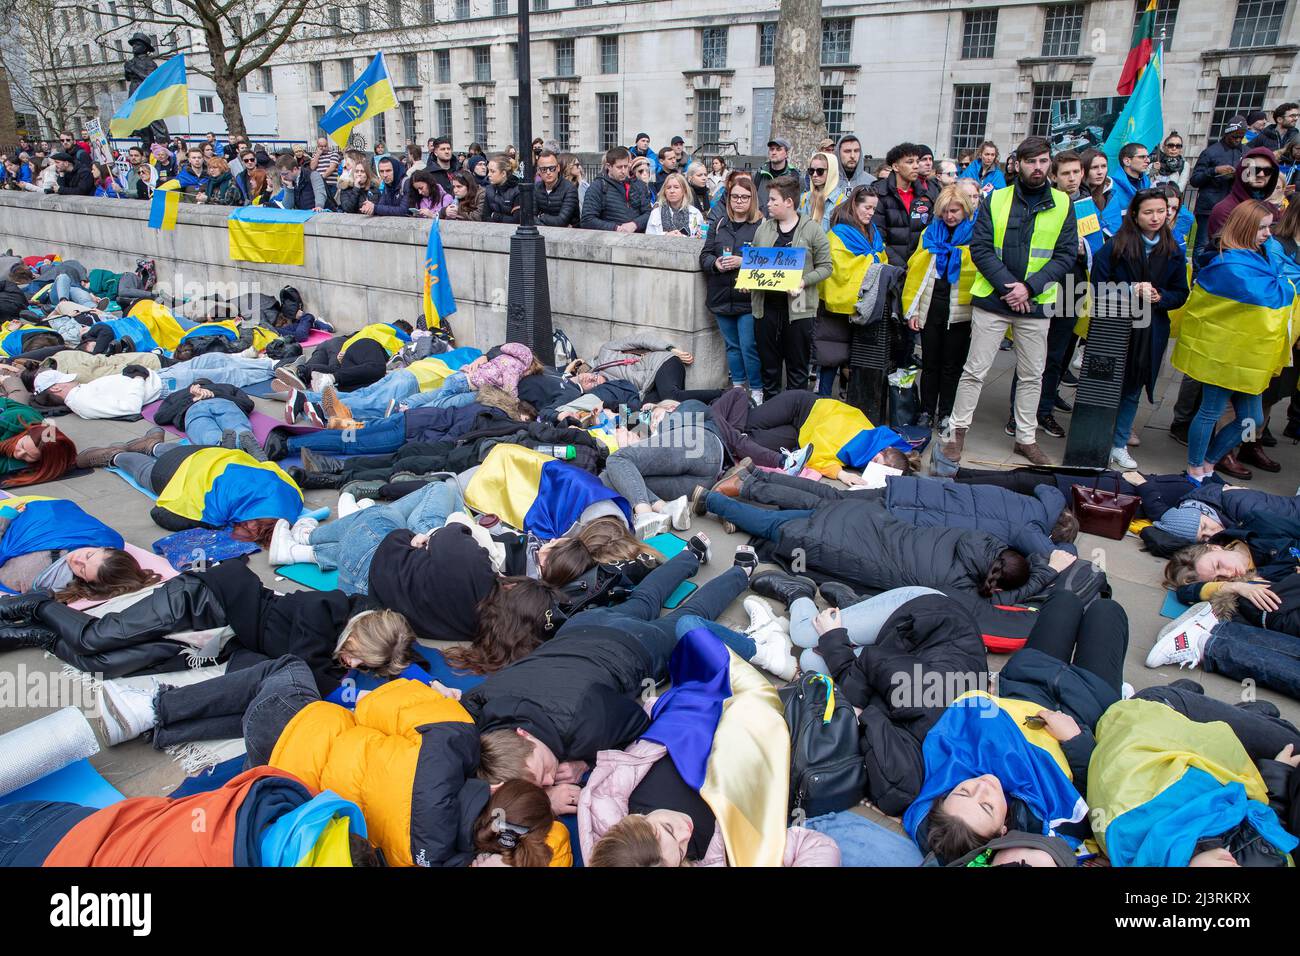 LONDON, APRIL 09 2022, Ukrainian protesters demonstrate against the Russian invasion of Ukraine outside Downing Street on Whitehall, London. Stock Photo